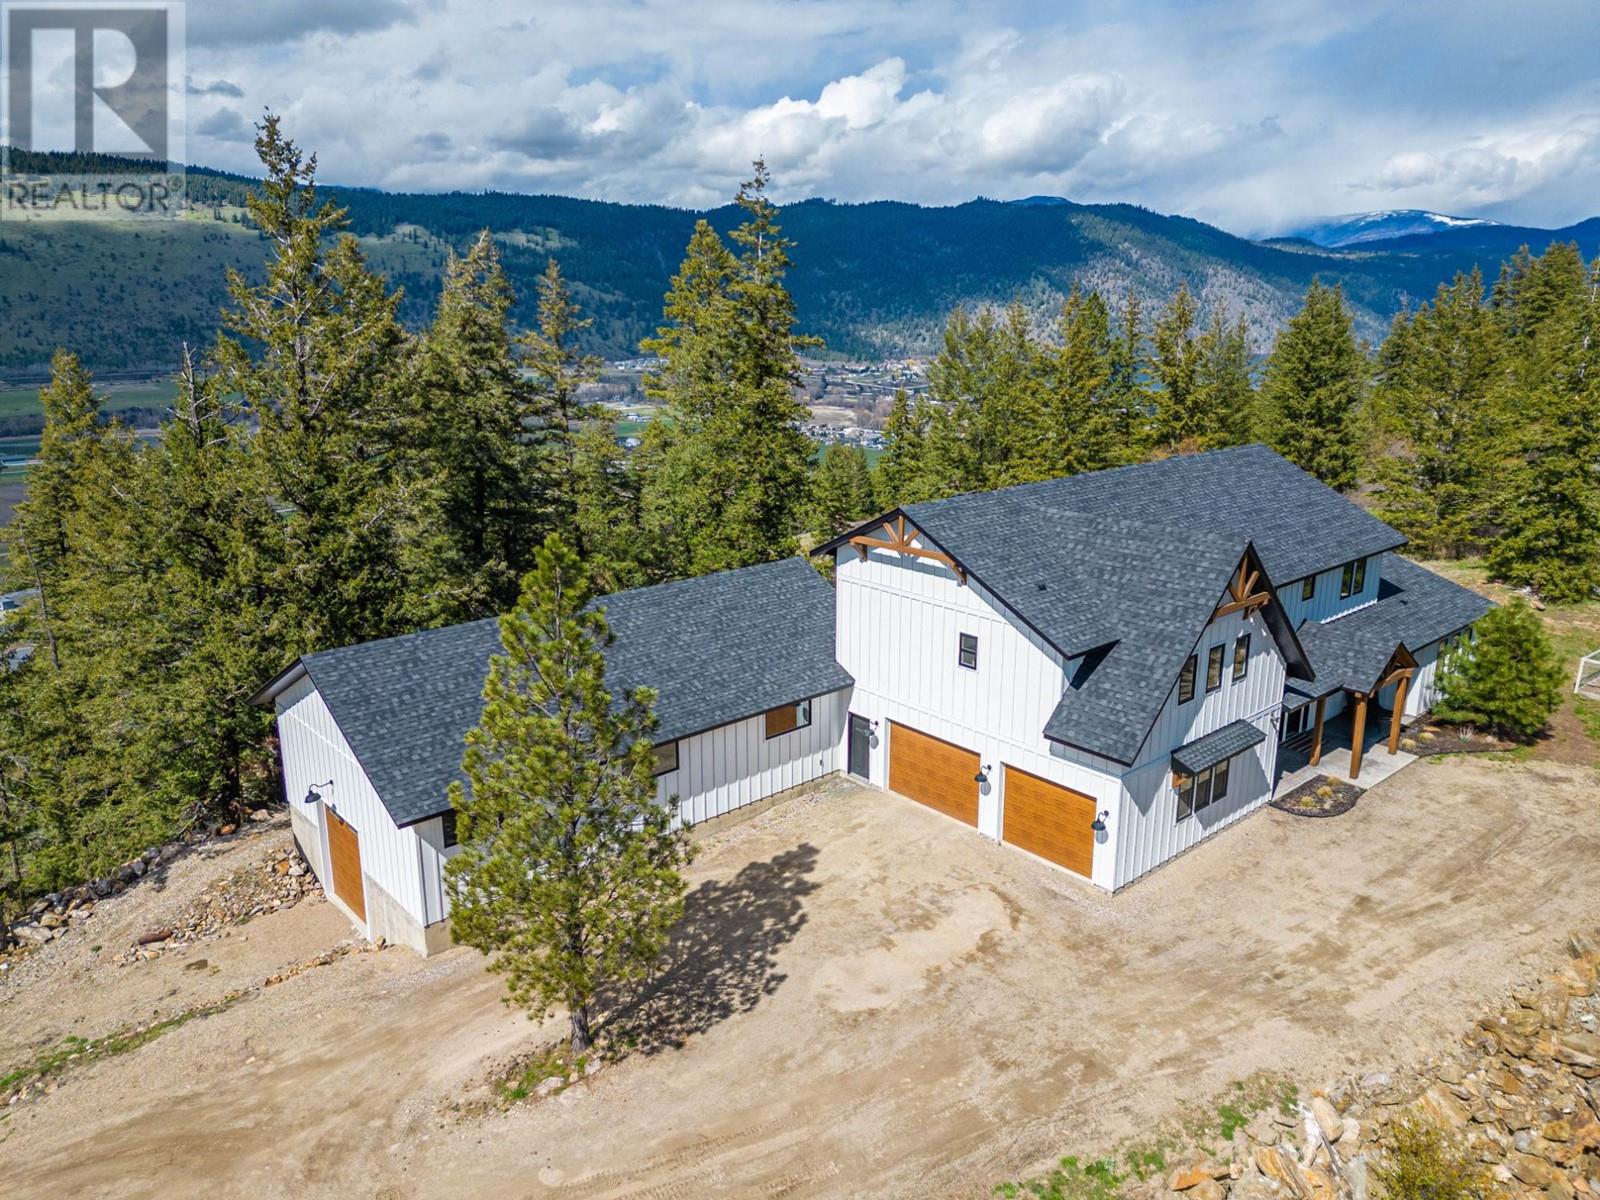 460 SHUSWAP CHASE CR RD, chase, British Columbia